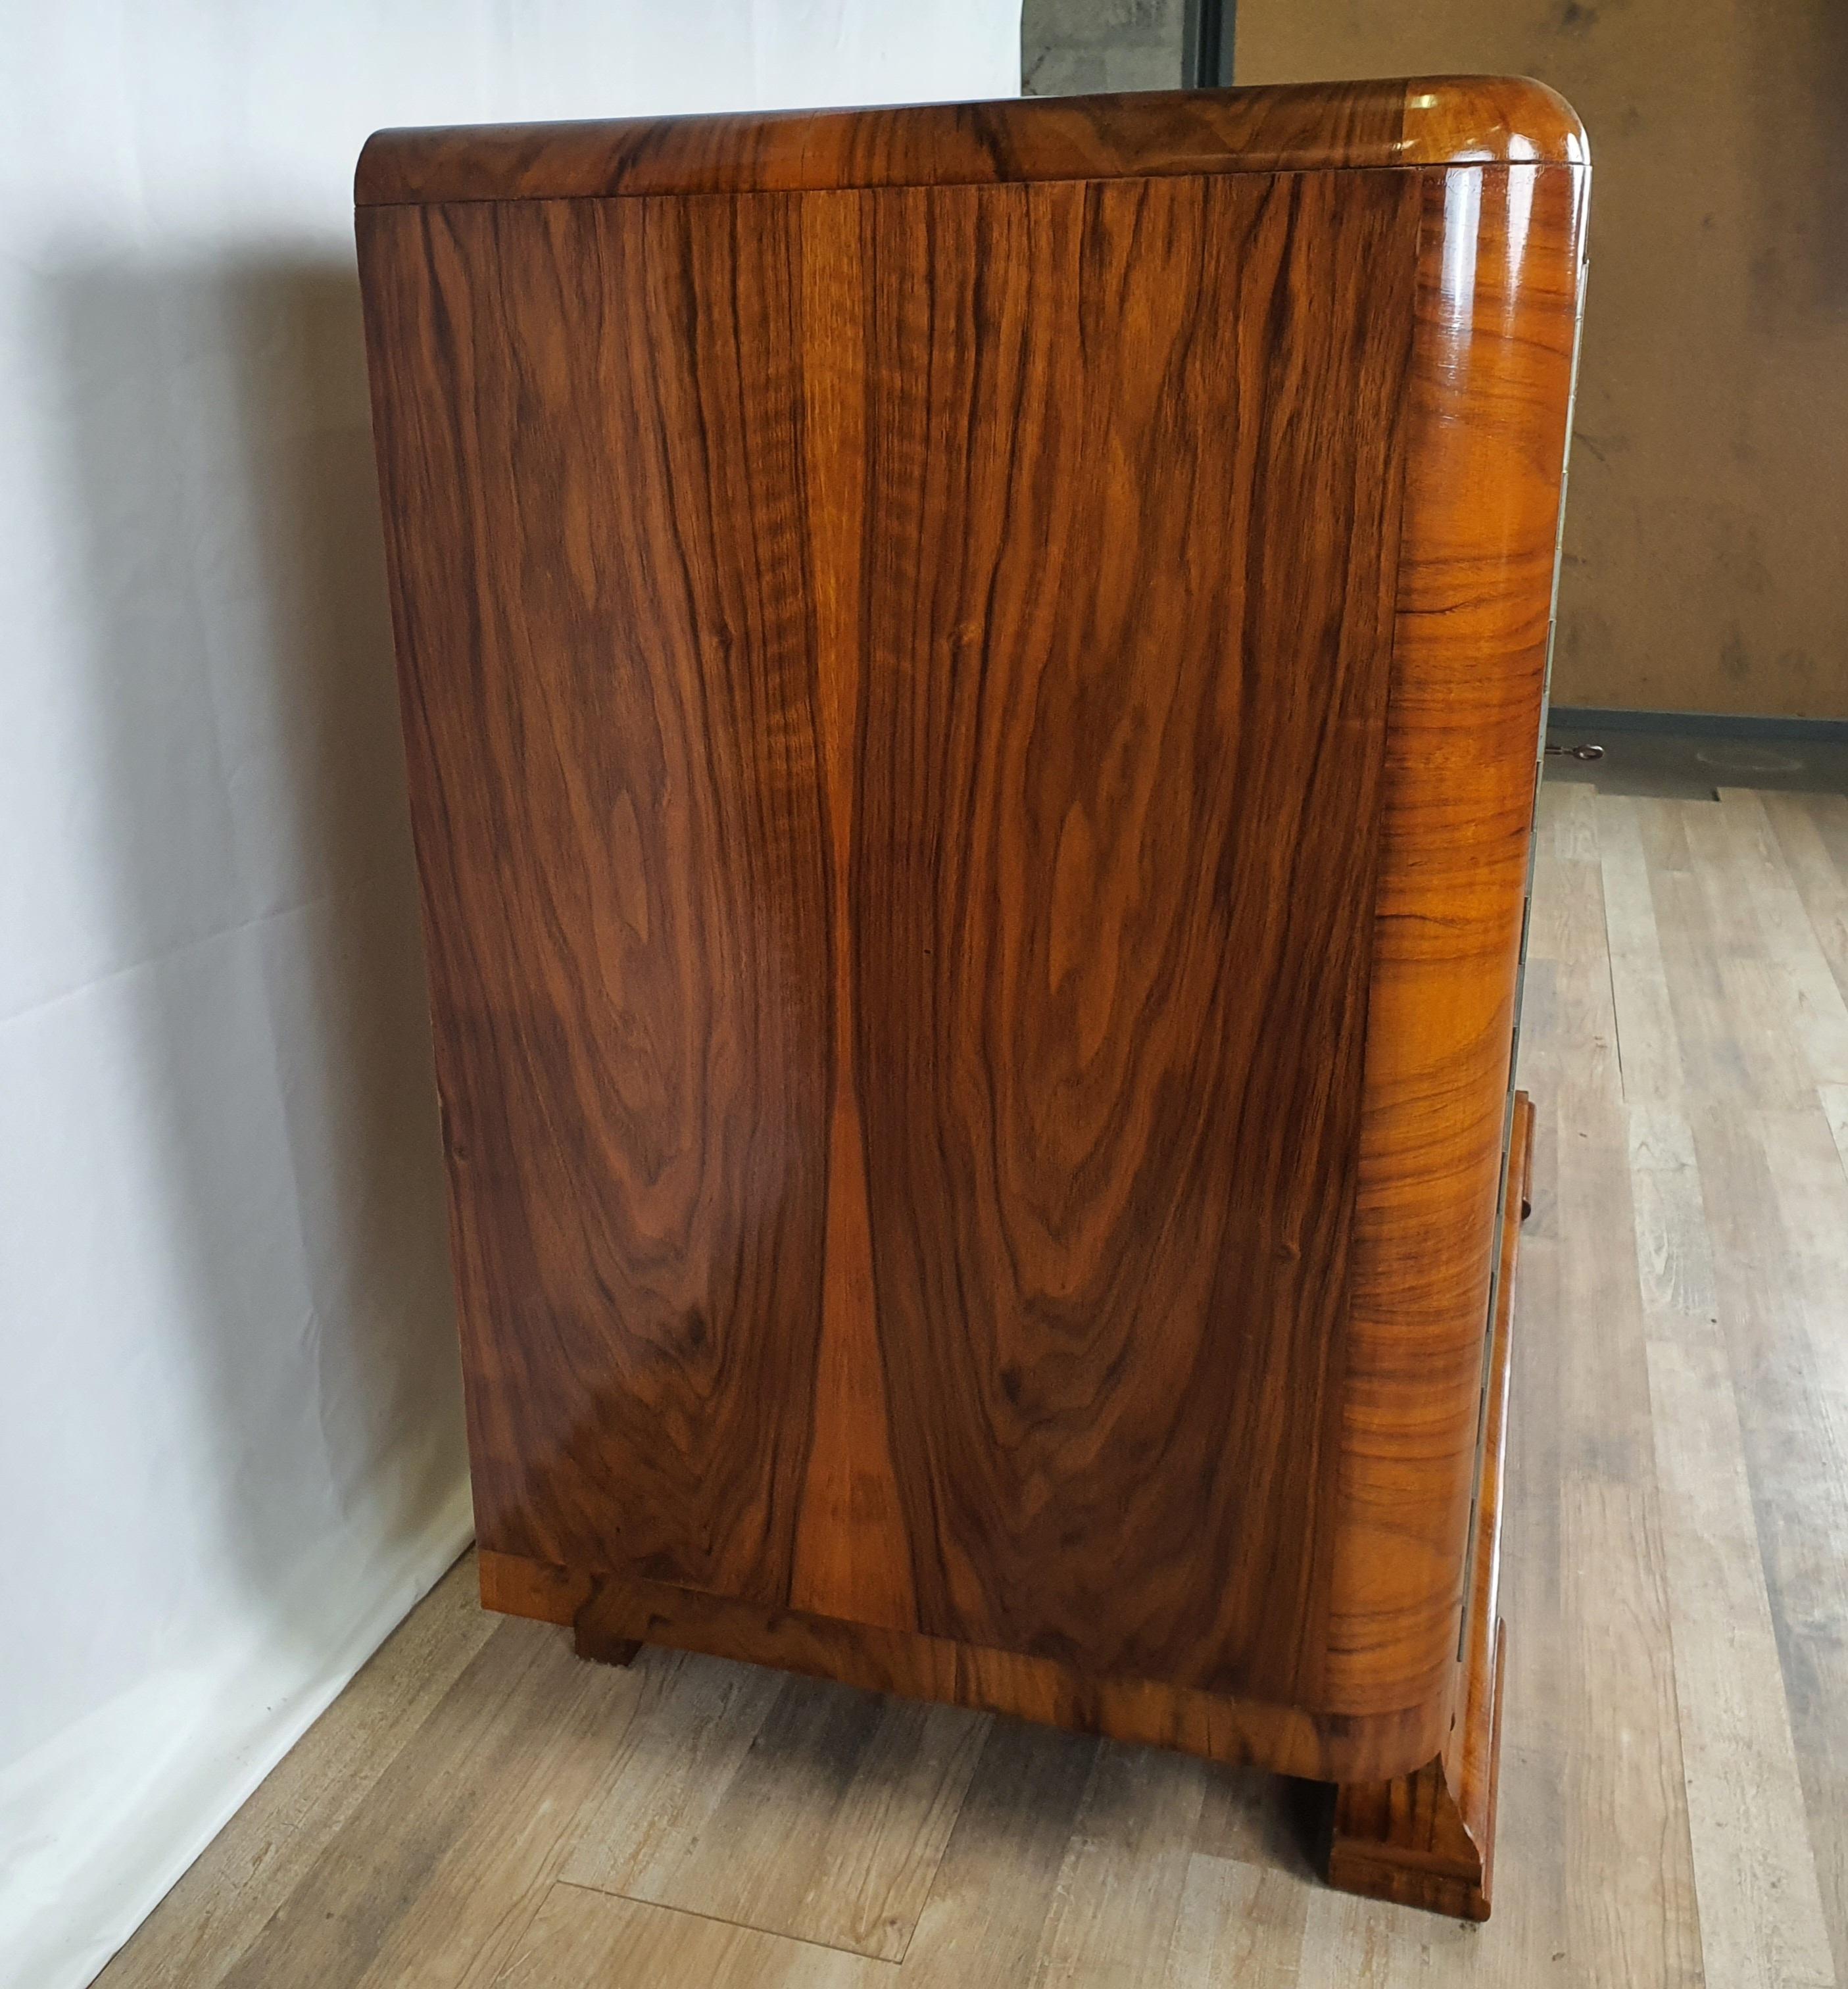 Elegant sideboard for living room or living room in walnut with spruce interior.

Design furniture polished and ready to be placed.

Impeccable proportions, curves in the right place and uniform and very particular line.

Inside we find a